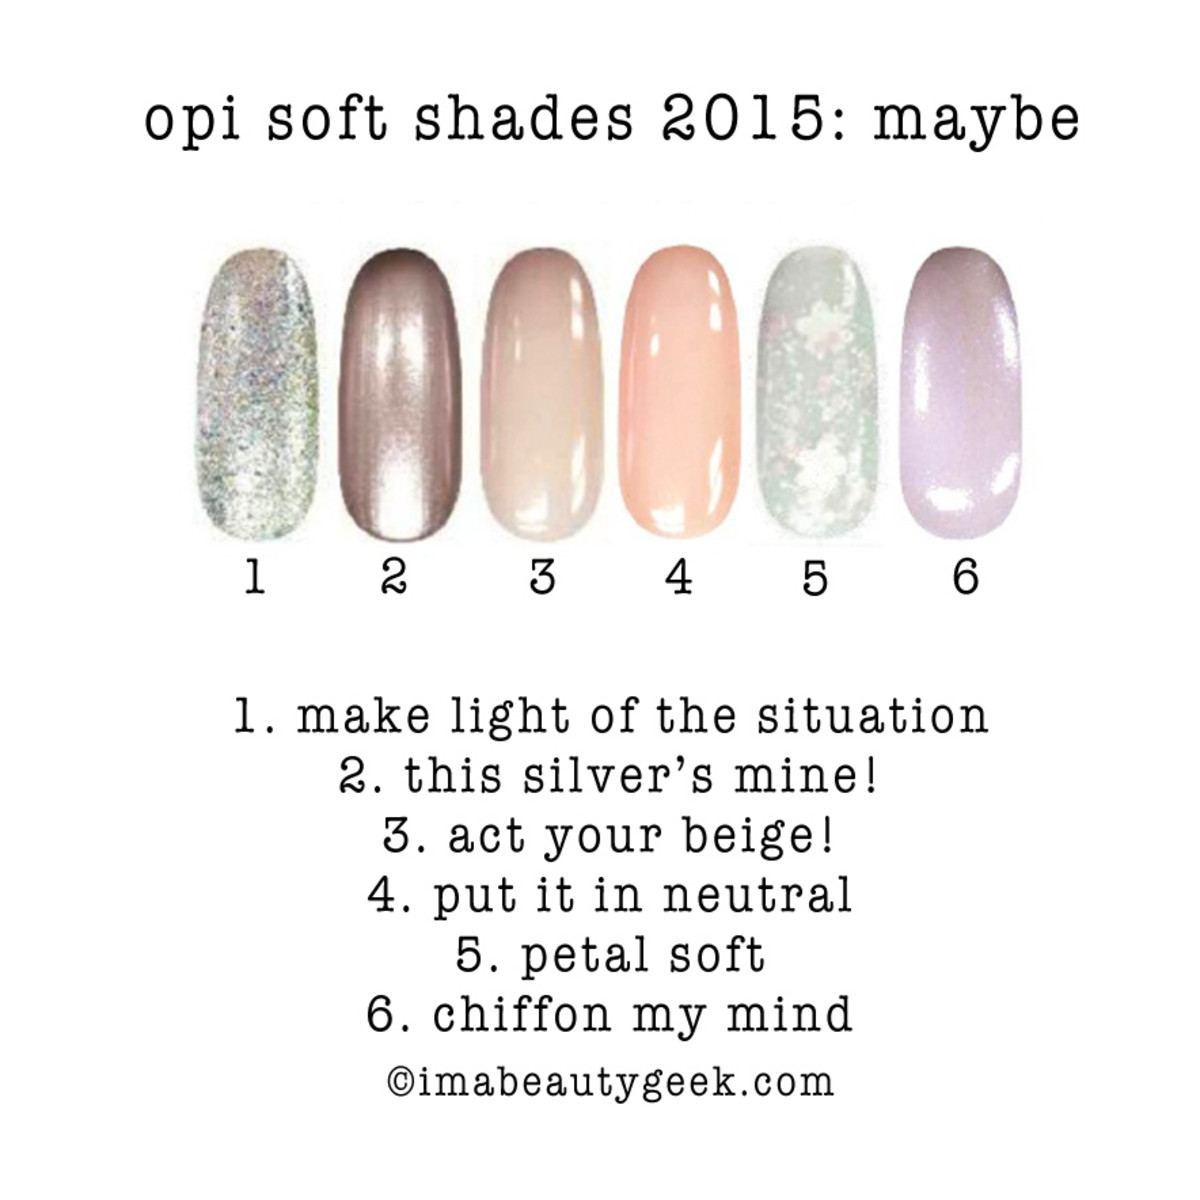 OPI Soft Shades 2015 Swatches